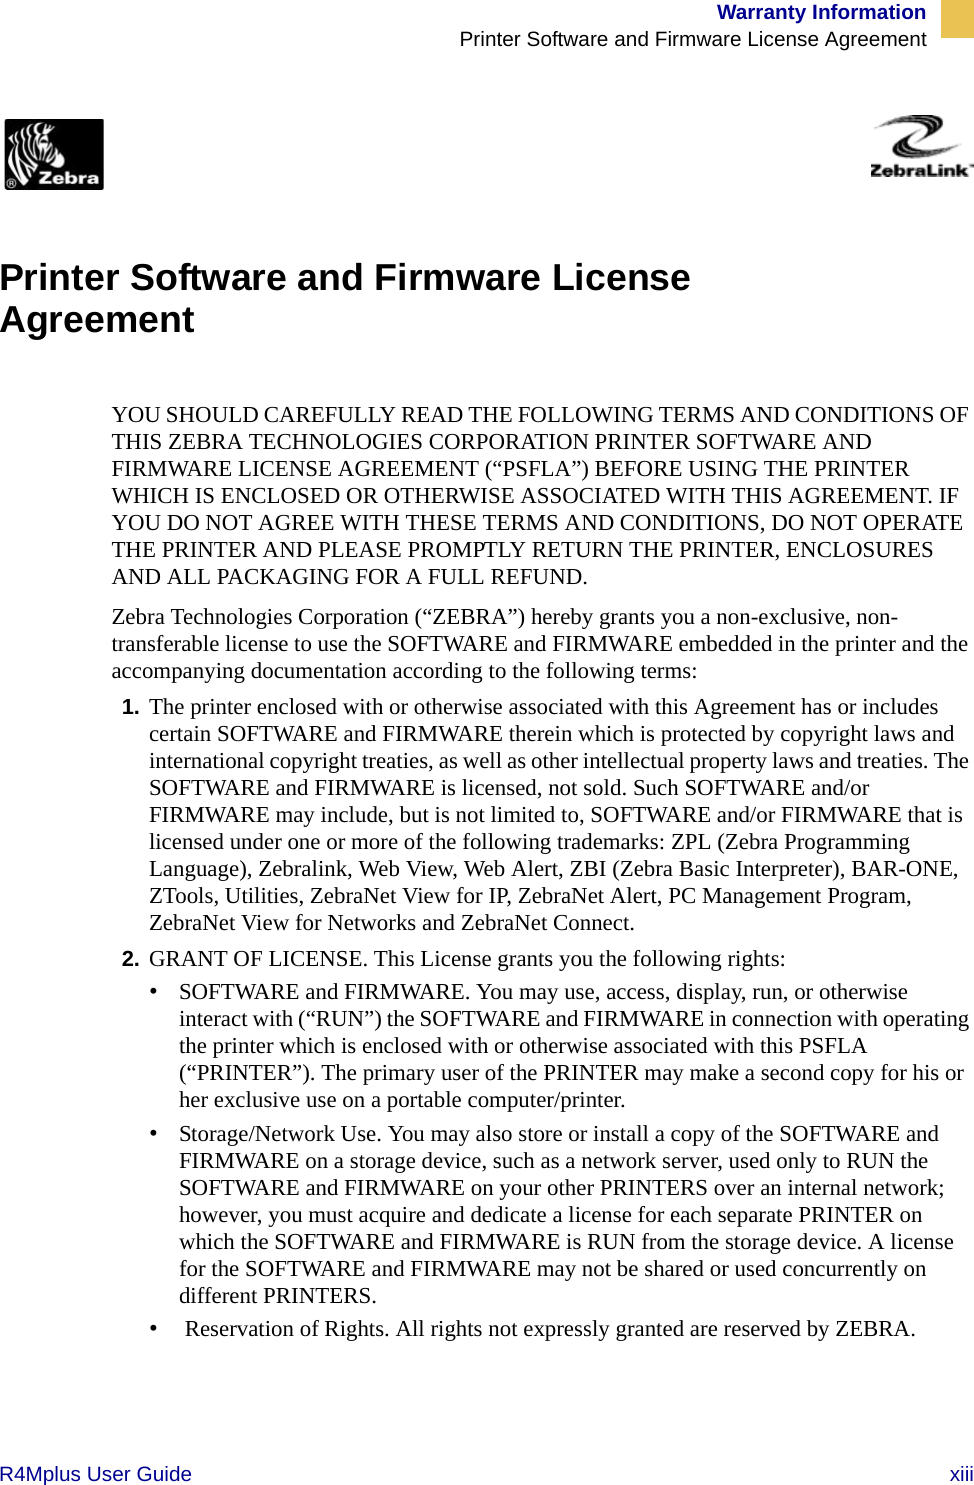 Warranty InformationPrinter Software and Firmware License AgreementR4Mplus User Guide  xiiiZebra Link License Agreement  Printer Software and Firmware License Agreement YOU SHOULD CAREFULLY READ THE FOLLOWING TERMS AND CONDITIONS OF THIS ZEBRA TECHNOLOGIES CORPORATION PRINTER SOFTWARE AND FIRMWARE LICENSE AGREEMENT (“PSFLA”) BEFORE USING THE PRINTER WHICH IS ENCLOSED OR OTHERWISE ASSOCIATED WITH THIS AGREEMENT. IF YOU DO NOT AGREE WITH THESE TERMS AND CONDITIONS, DO NOT OPERATE THE PRINTER AND PLEASE PROMPTLY RETURN THE PRINTER, ENCLOSURES AND ALL PACKAGING FOR A FULL REFUND.Zebra Technologies Corporation (“ZEBRA”) hereby grants you a non-exclusive, non-transferable license to use the SOFTWARE and FIRMWARE embedded in the printer and the accompanying documentation according to the following terms:1. The printer enclosed with or otherwise associated with this Agreement has or includes certain SOFTWARE and FIRMWARE therein which is protected by copyright laws and international copyright treaties, as well as other intellectual property laws and treaties. The SOFTWARE and FIRMWARE is licensed, not sold. Such SOFTWARE and/or FIRMWARE may include, but is not limited to, SOFTWARE and/or FIRMWARE that is licensed under one or more of the following trademarks: ZPL (Zebra Programming Language), Zebralink, Web View, Web Alert, ZBI (Zebra Basic Interpreter), BAR-ONE, ZTools, Utilities, ZebraNet View for IP, ZebraNet Alert, PC Management Program, ZebraNet View for Networks and ZebraNet Connect. 2. GRANT OF LICENSE. This License grants you the following rights:•SOFTWARE and FIRMWARE. You may use, access, display, run, or otherwise interact with (“RUN”) the SOFTWARE and FIRMWARE in connection with operating the printer which is enclosed with or otherwise associated with this PSFLA (“PRINTER”). The primary user of the PRINTER may make a second copy for his or her exclusive use on a portable computer/printer.•Storage/Network Use. You may also store or install a copy of the SOFTWARE and FIRMWARE on a storage device, such as a network server, used only to RUN the SOFTWARE and FIRMWARE on your other PRINTERS over an internal network; however, you must acquire and dedicate a license for each separate PRINTER on which the SOFTWARE and FIRMWARE is RUN from the storage device. A license for the SOFTWARE and FIRMWARE may not be shared or used concurrently on different PRINTERS.• Reservation of Rights. All rights not expressly granted are reserved by ZEBRA. 